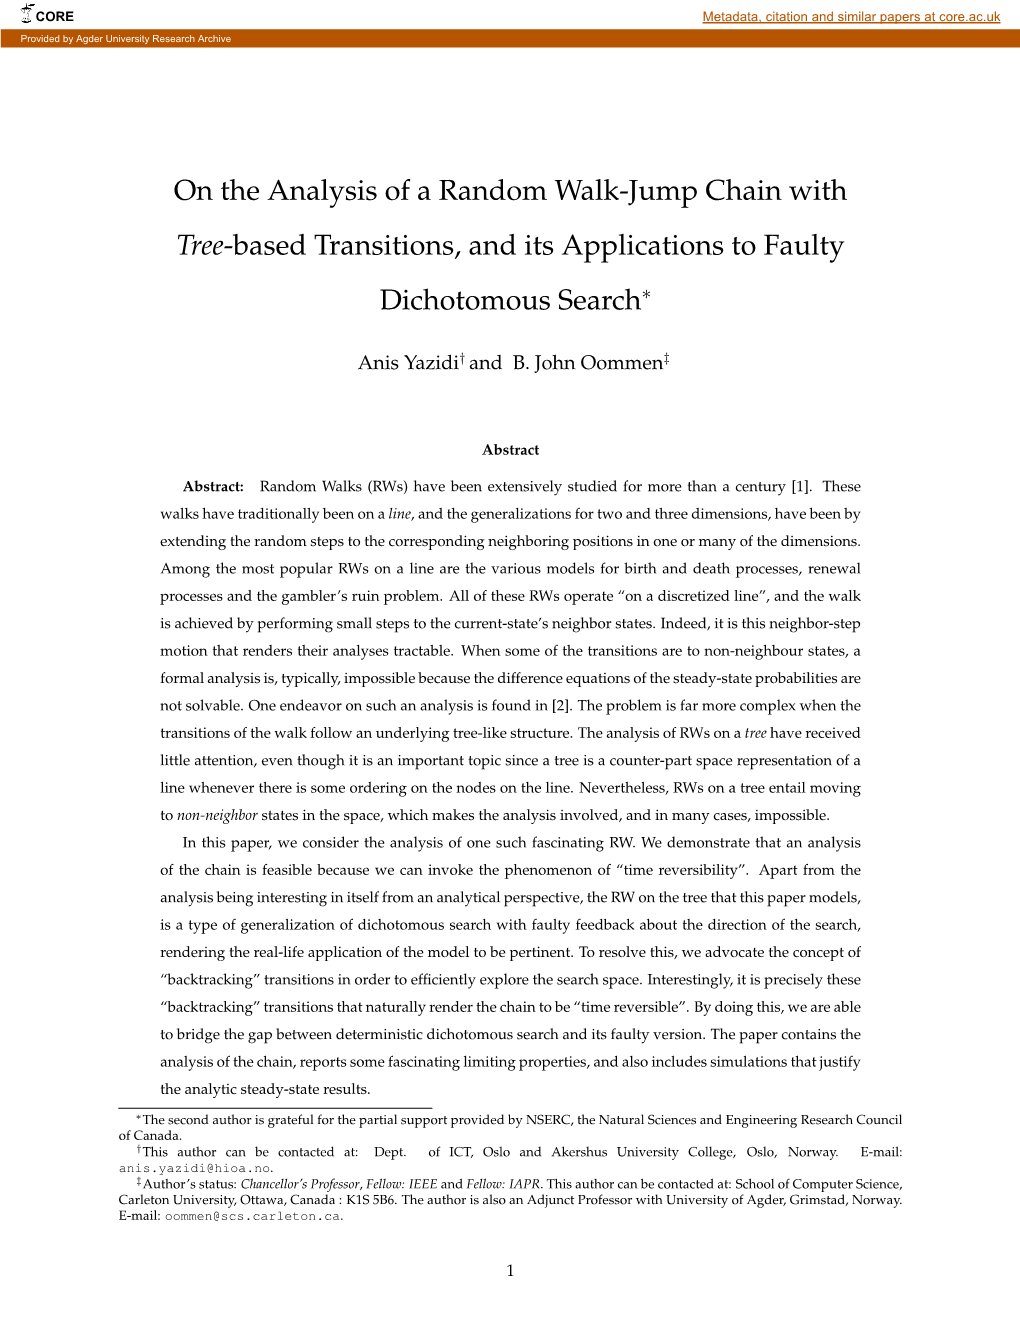 On the Analysis of a Random Walk-Jump Chain with Tree-Based Transitions, and Its Applications to Faulty Dichotomous Search∗